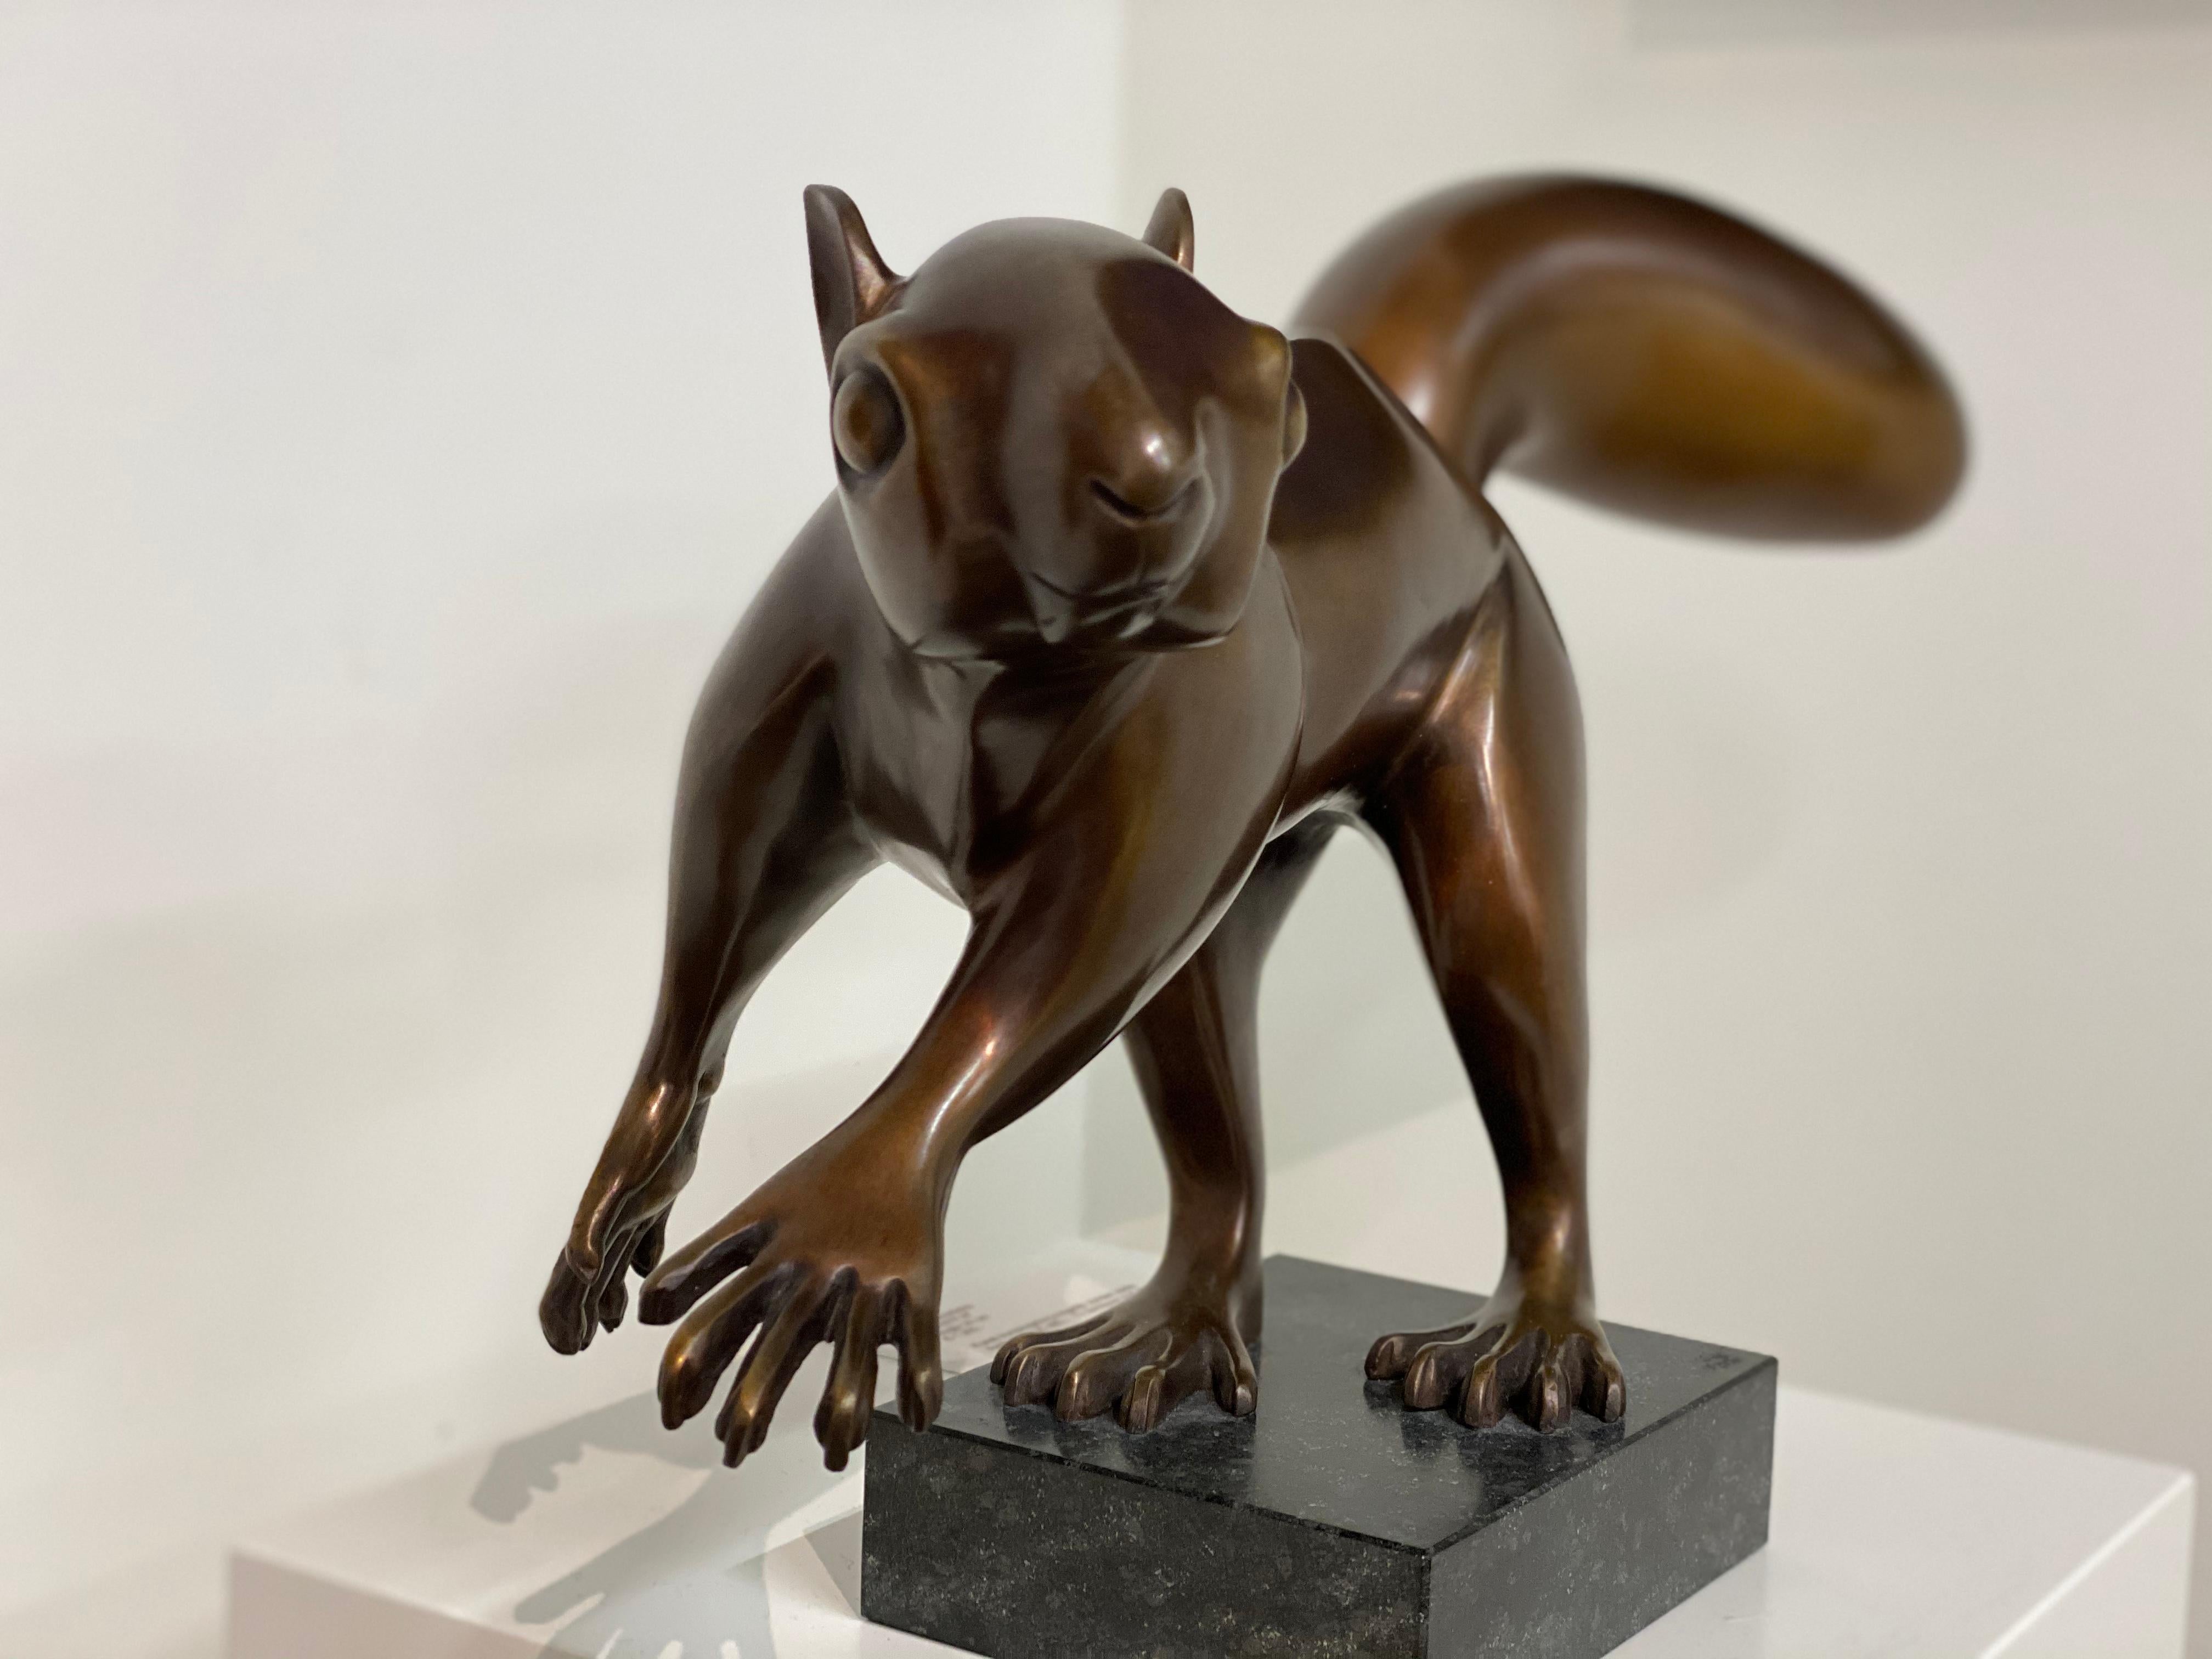 Catch me if you can!- 21st Century Dutch Bronze Sculpture of a Squirrel - Gold Figurative Sculpture by Frans van Straaten